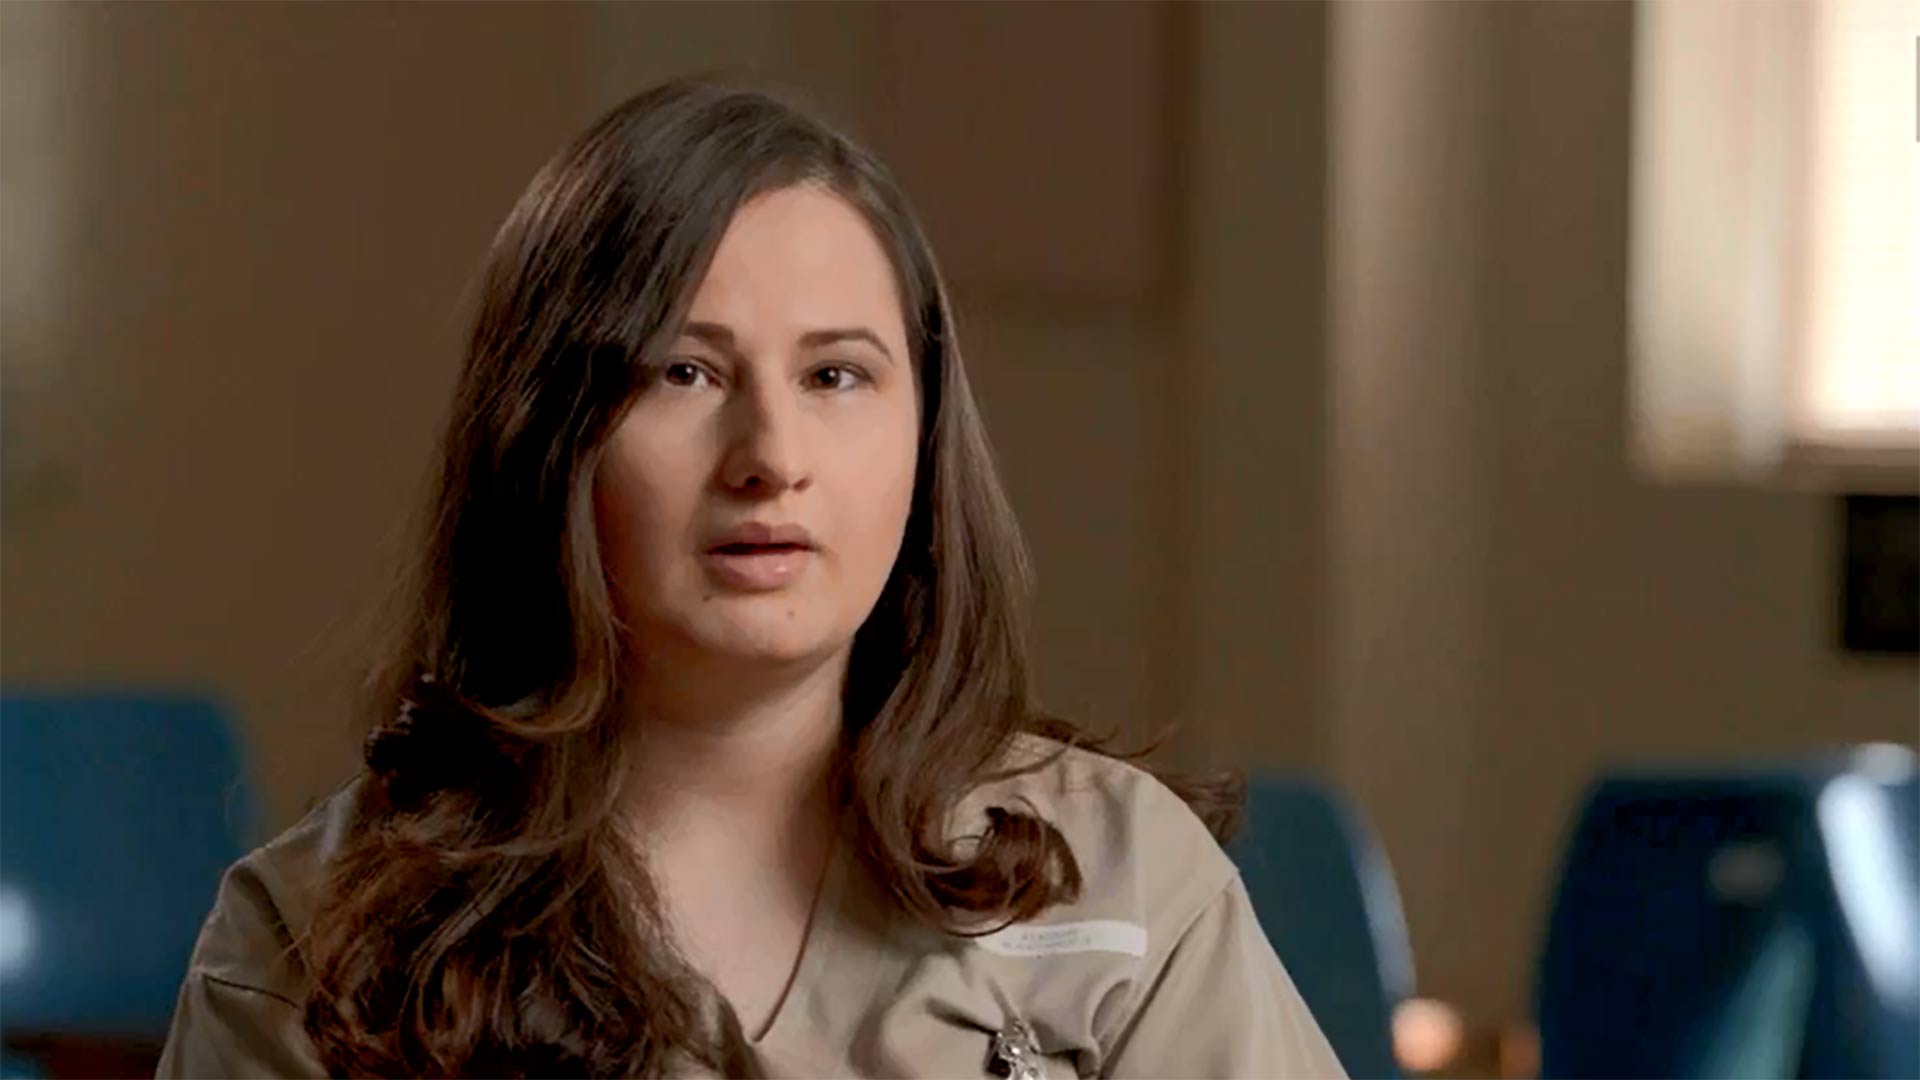 How to Watch 'Prison Confessions of Gypsy Rose Blanchard' Without